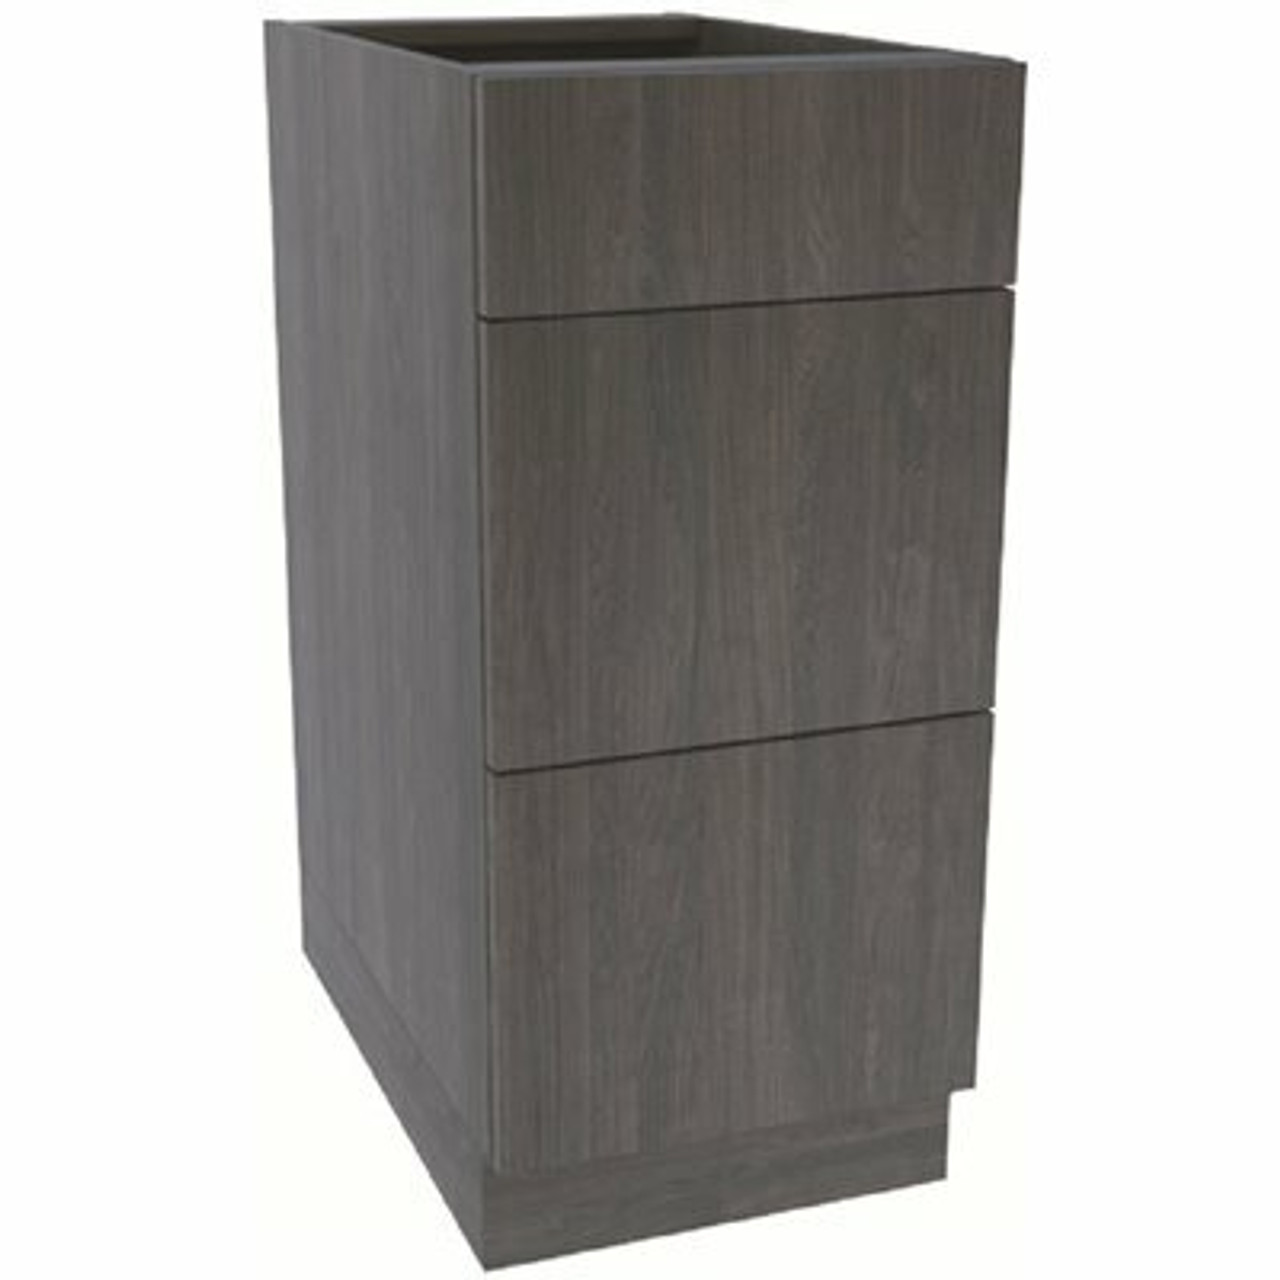 Cambridge Ready To Assemble Threespine 12 In. X 34.5 In. X 21 In. Stock Drawer Base Cabinet In Carbon Marine